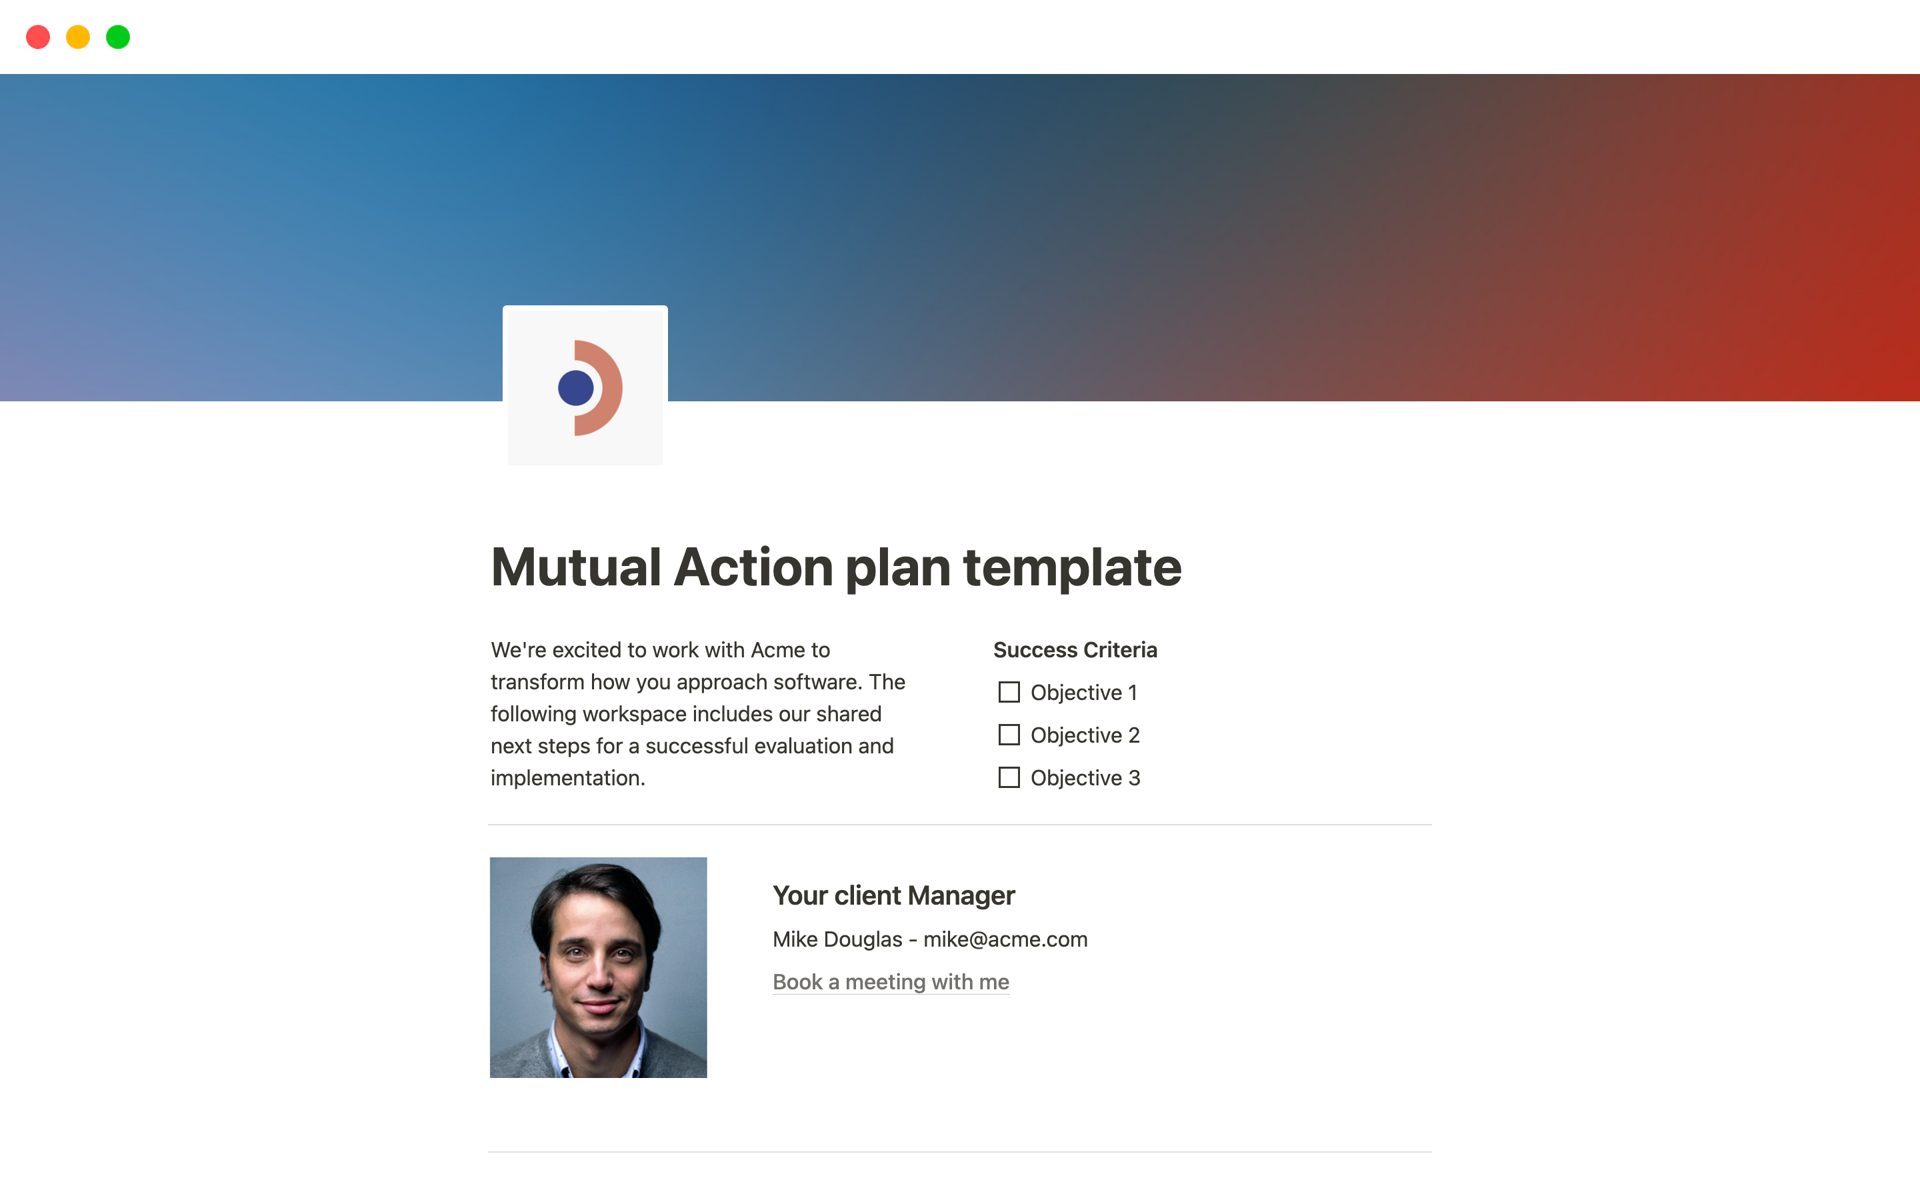 Guide your champion through the sales process with mutual action plans so you can stop using that spreadsheet.